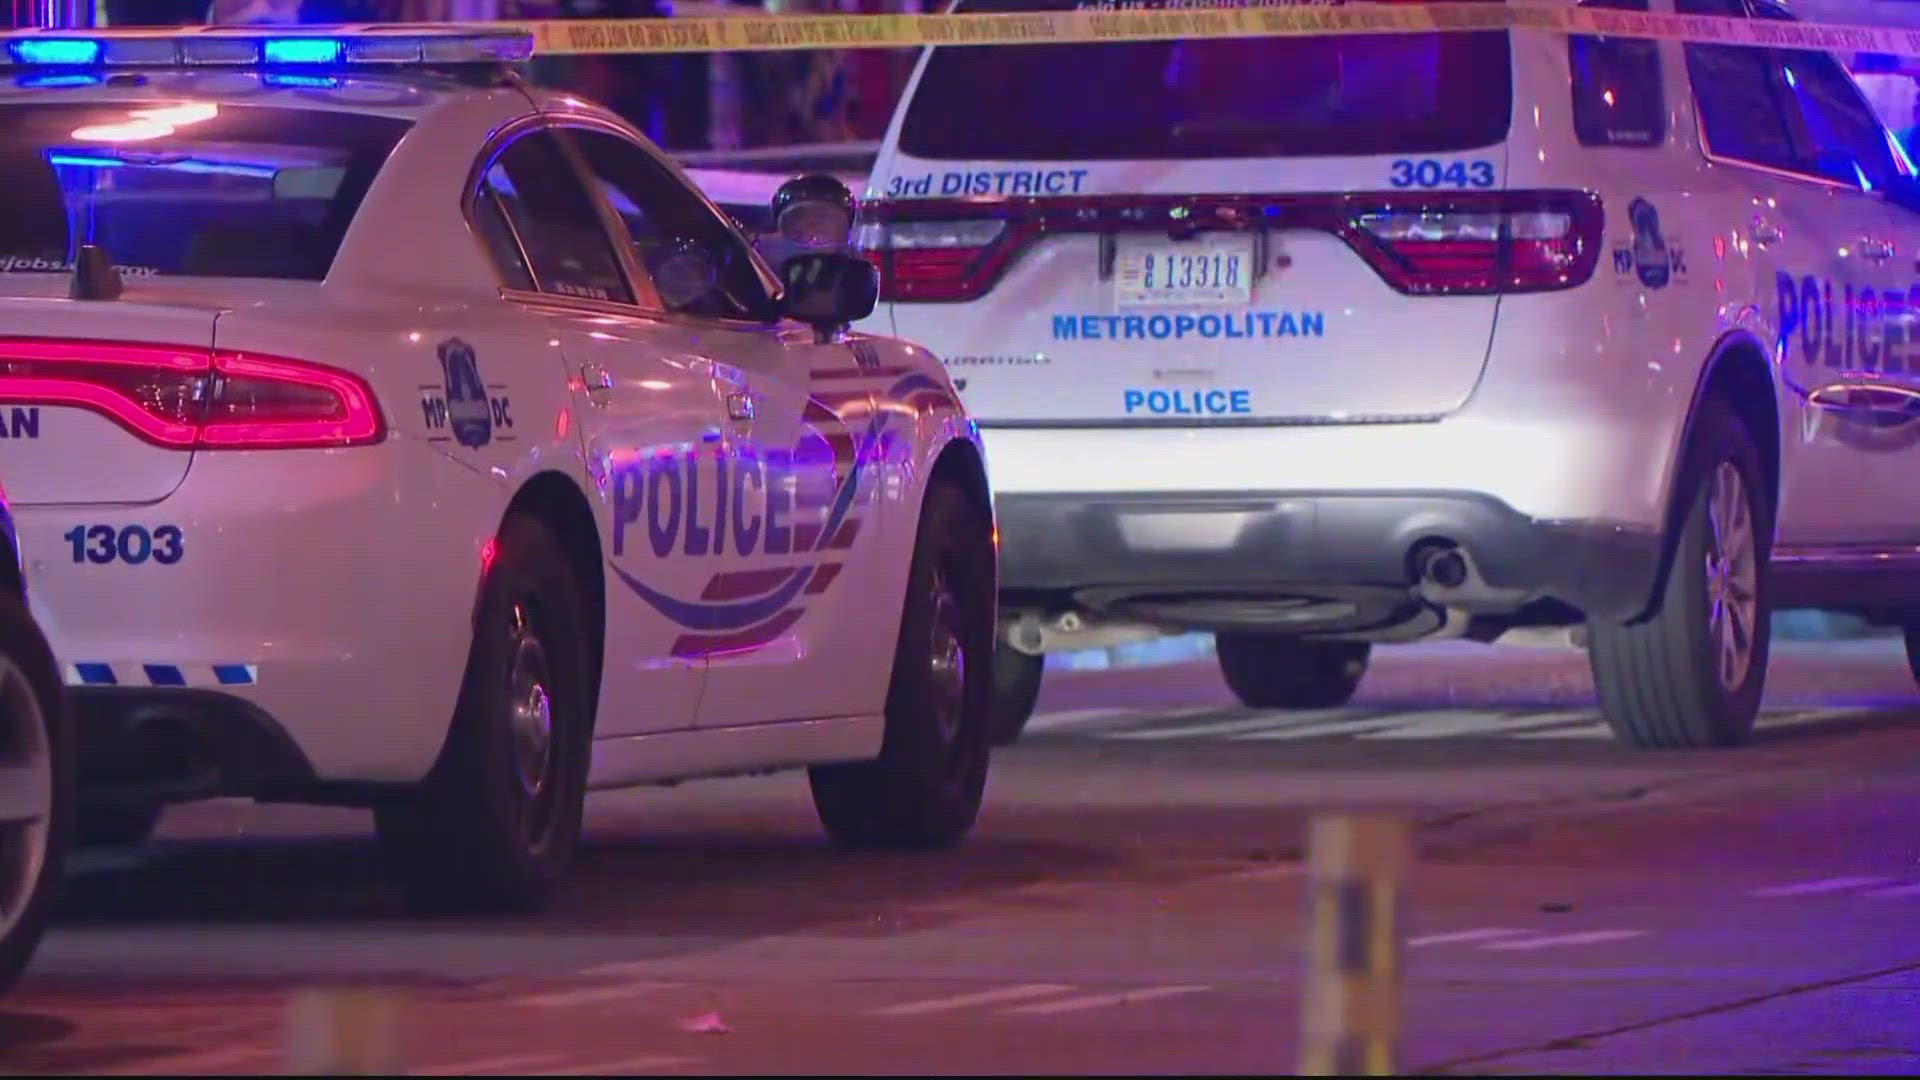 The victim of this double shooting has since been identified as 33-year-old Kevin Scott of District Heights, D.C.